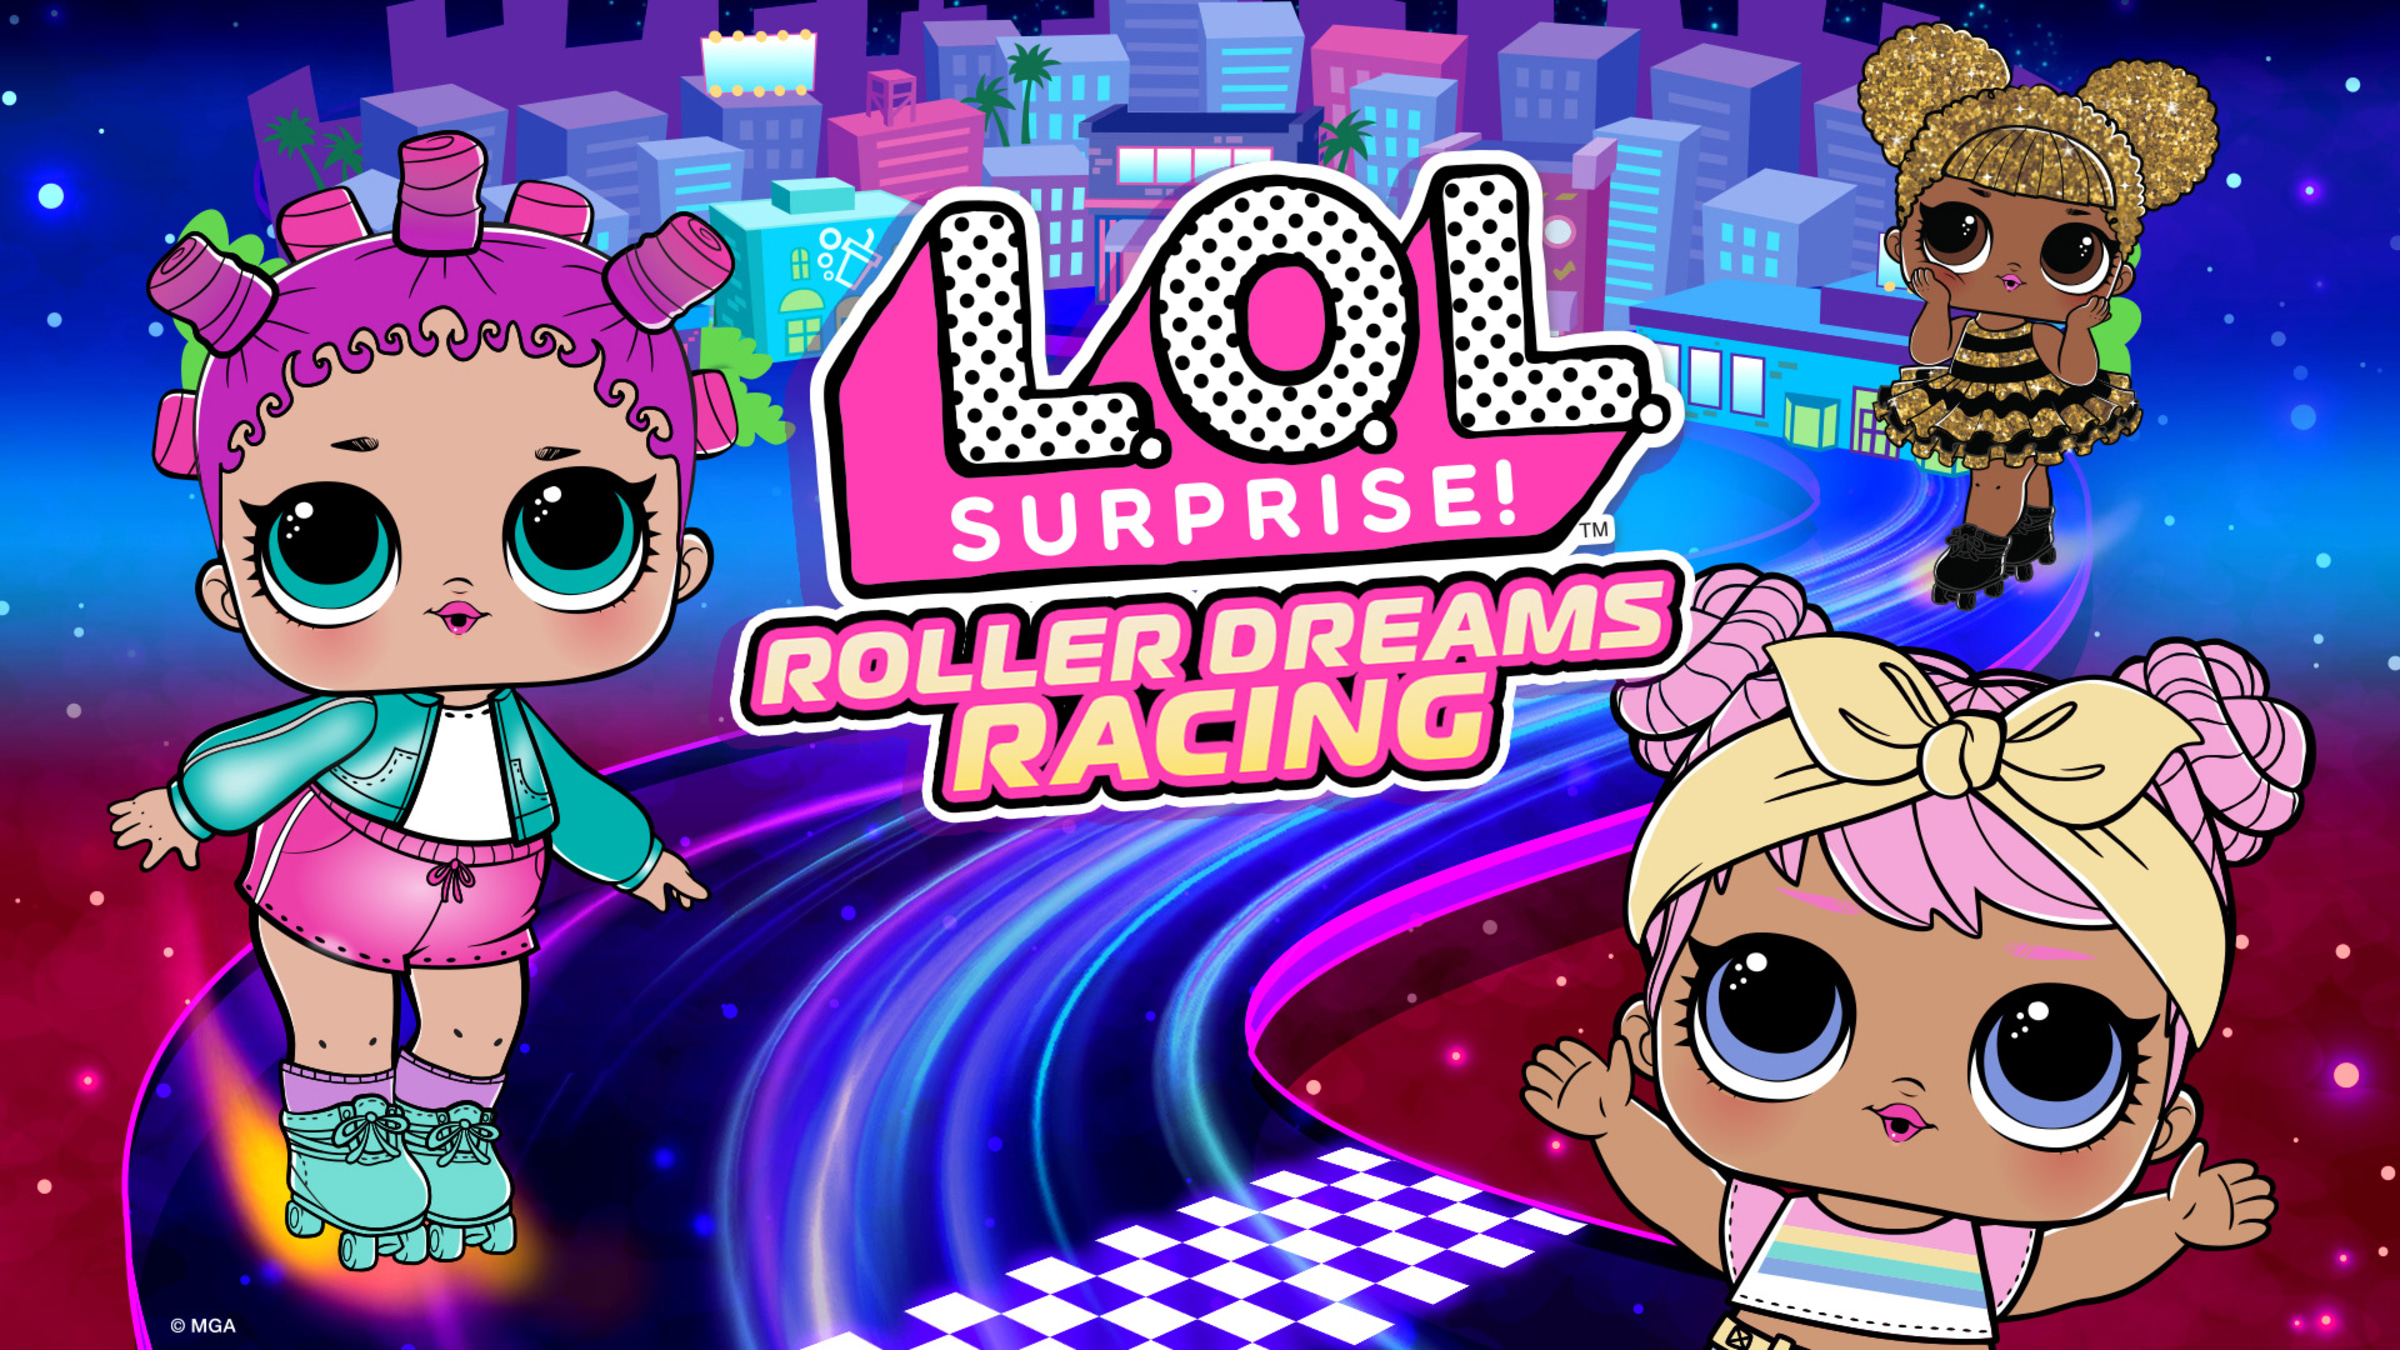 L.O.L. Surprise! Roller Dreams Racing for Nintendo Switch